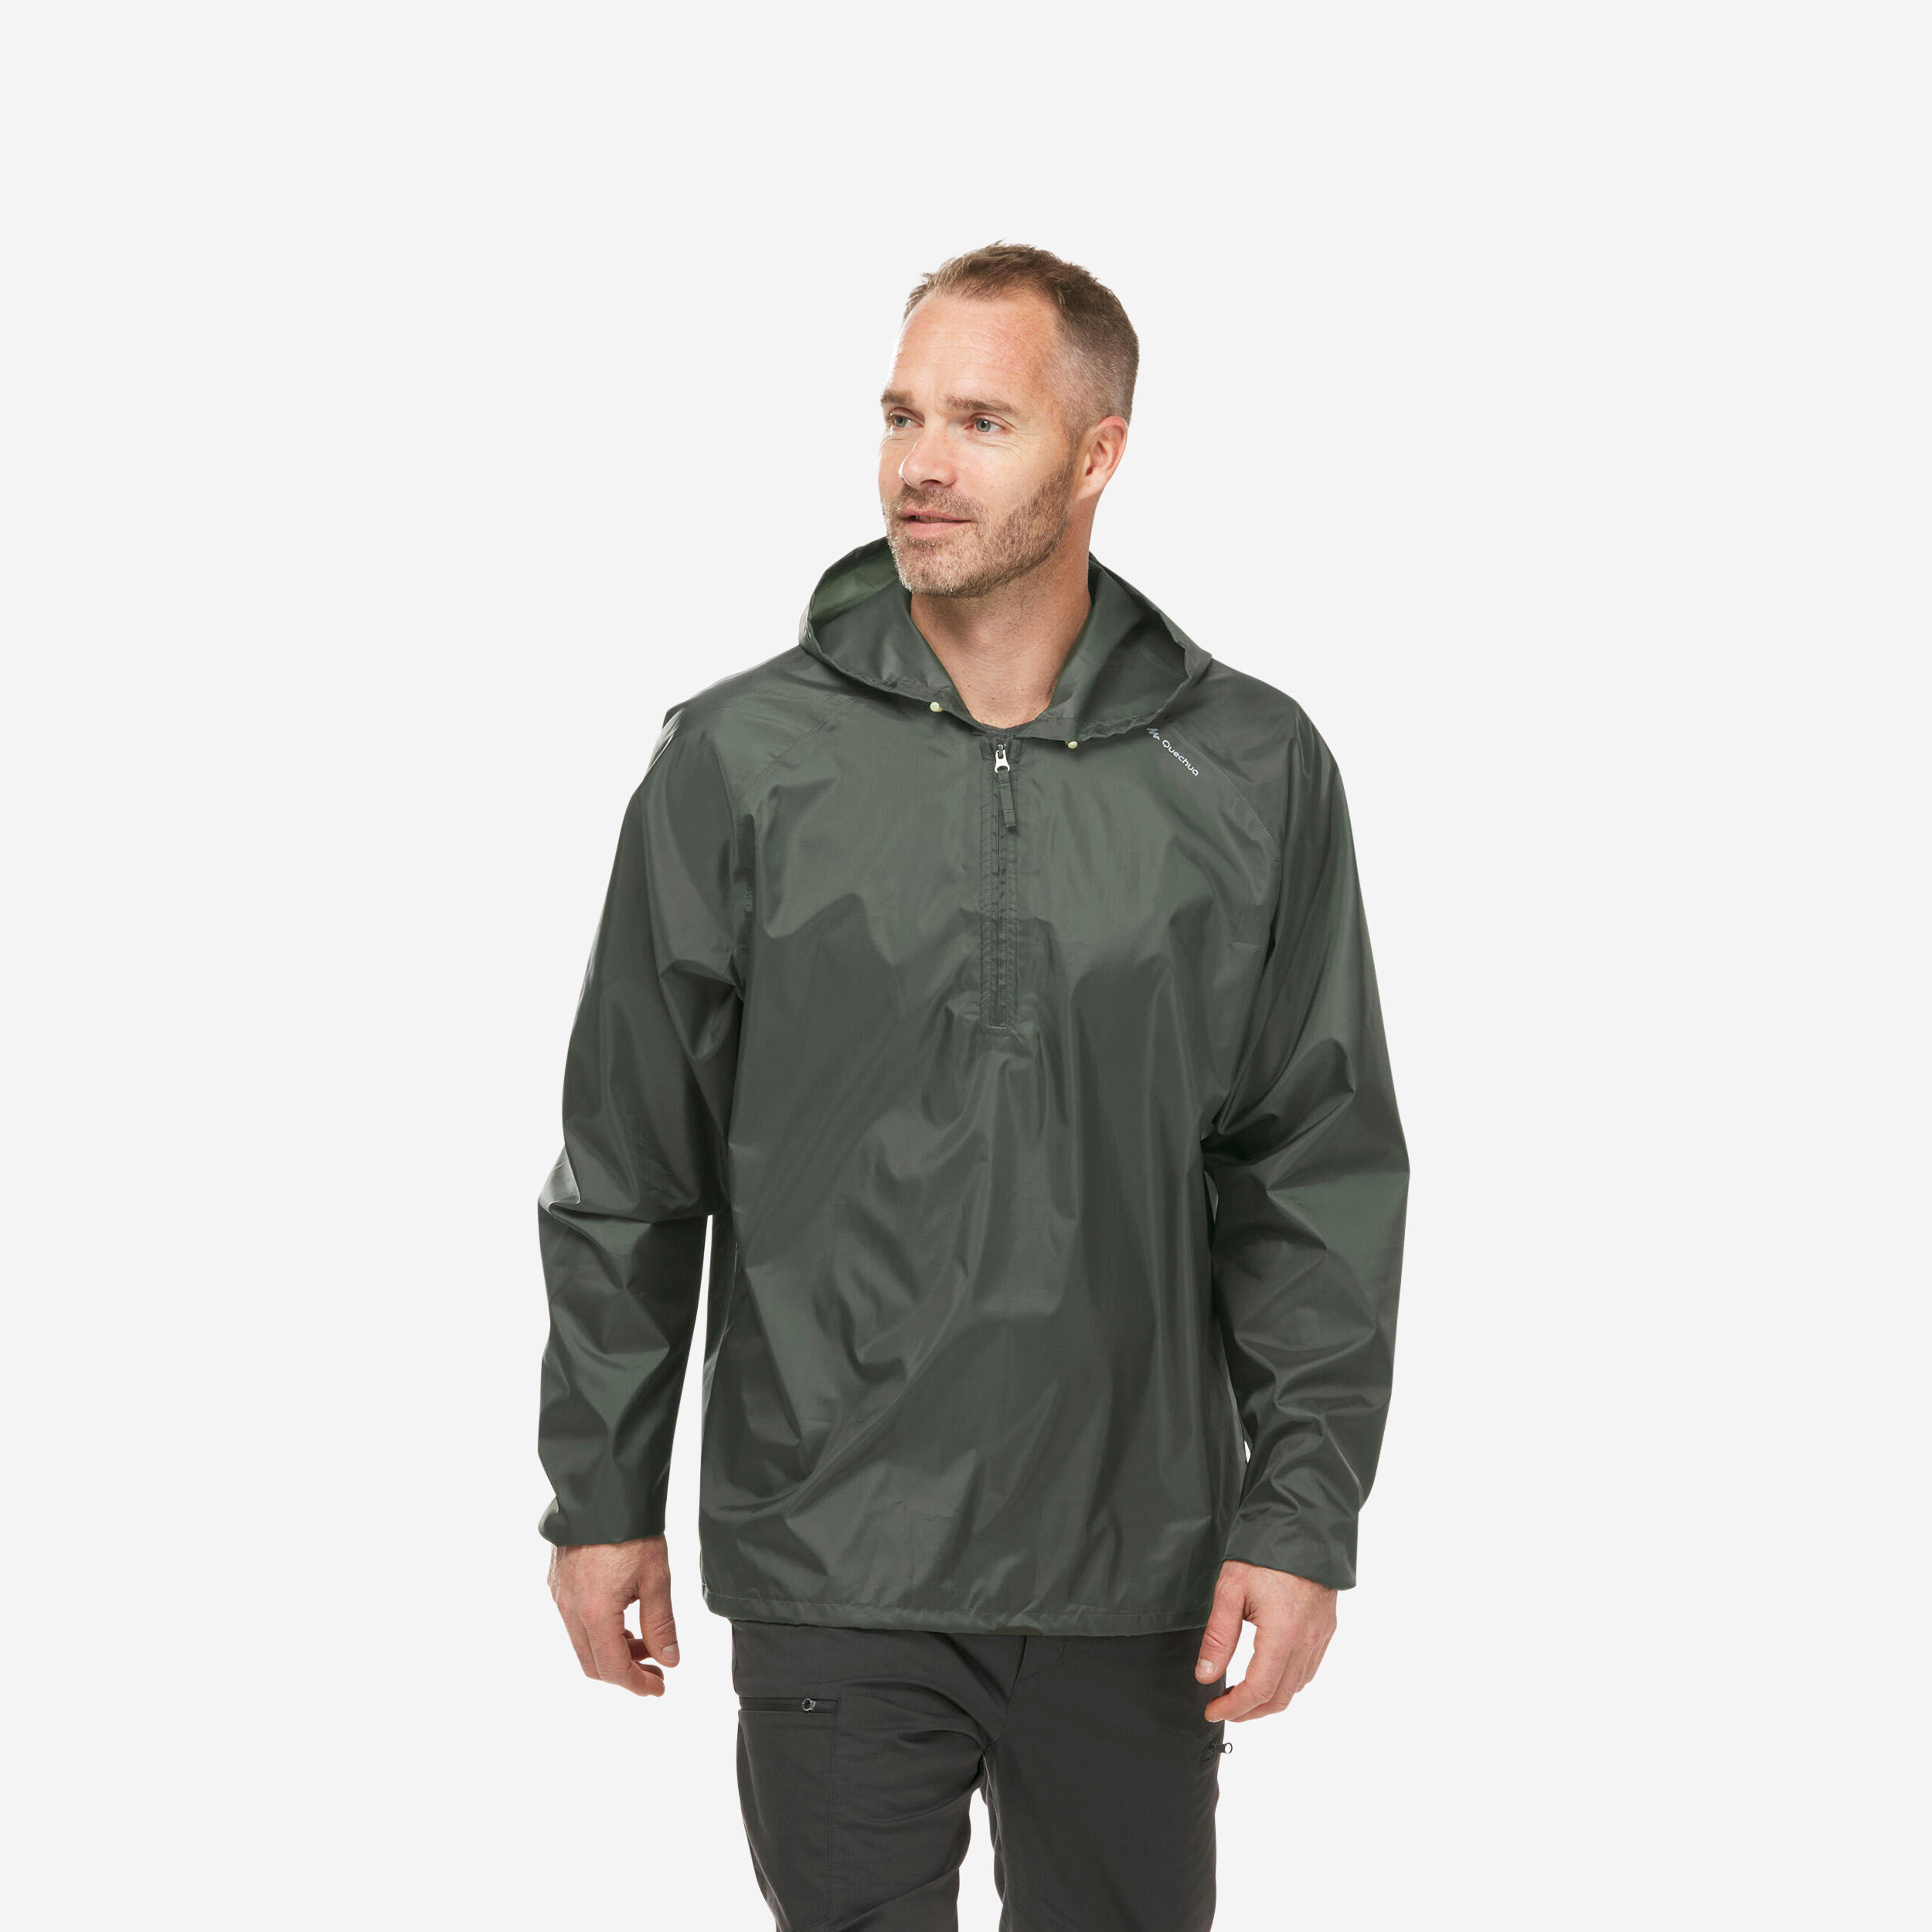 How To Choose The Best Rain Jacket For Travellers